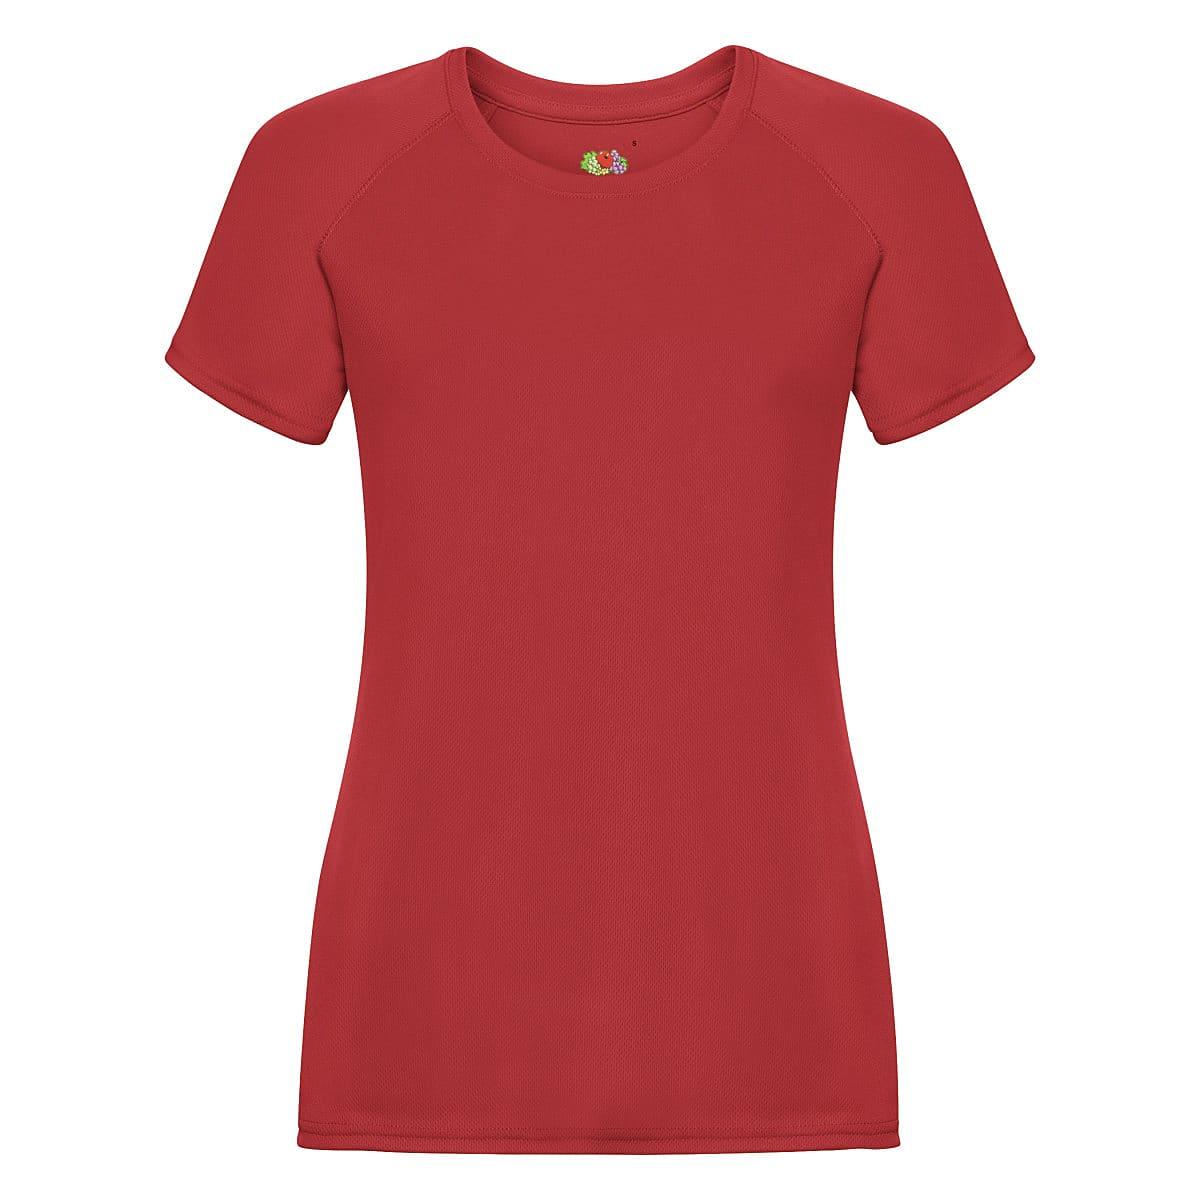 Fruit Of The Loom Womens Performance T-Shirt in Red (Product Code: 61392)